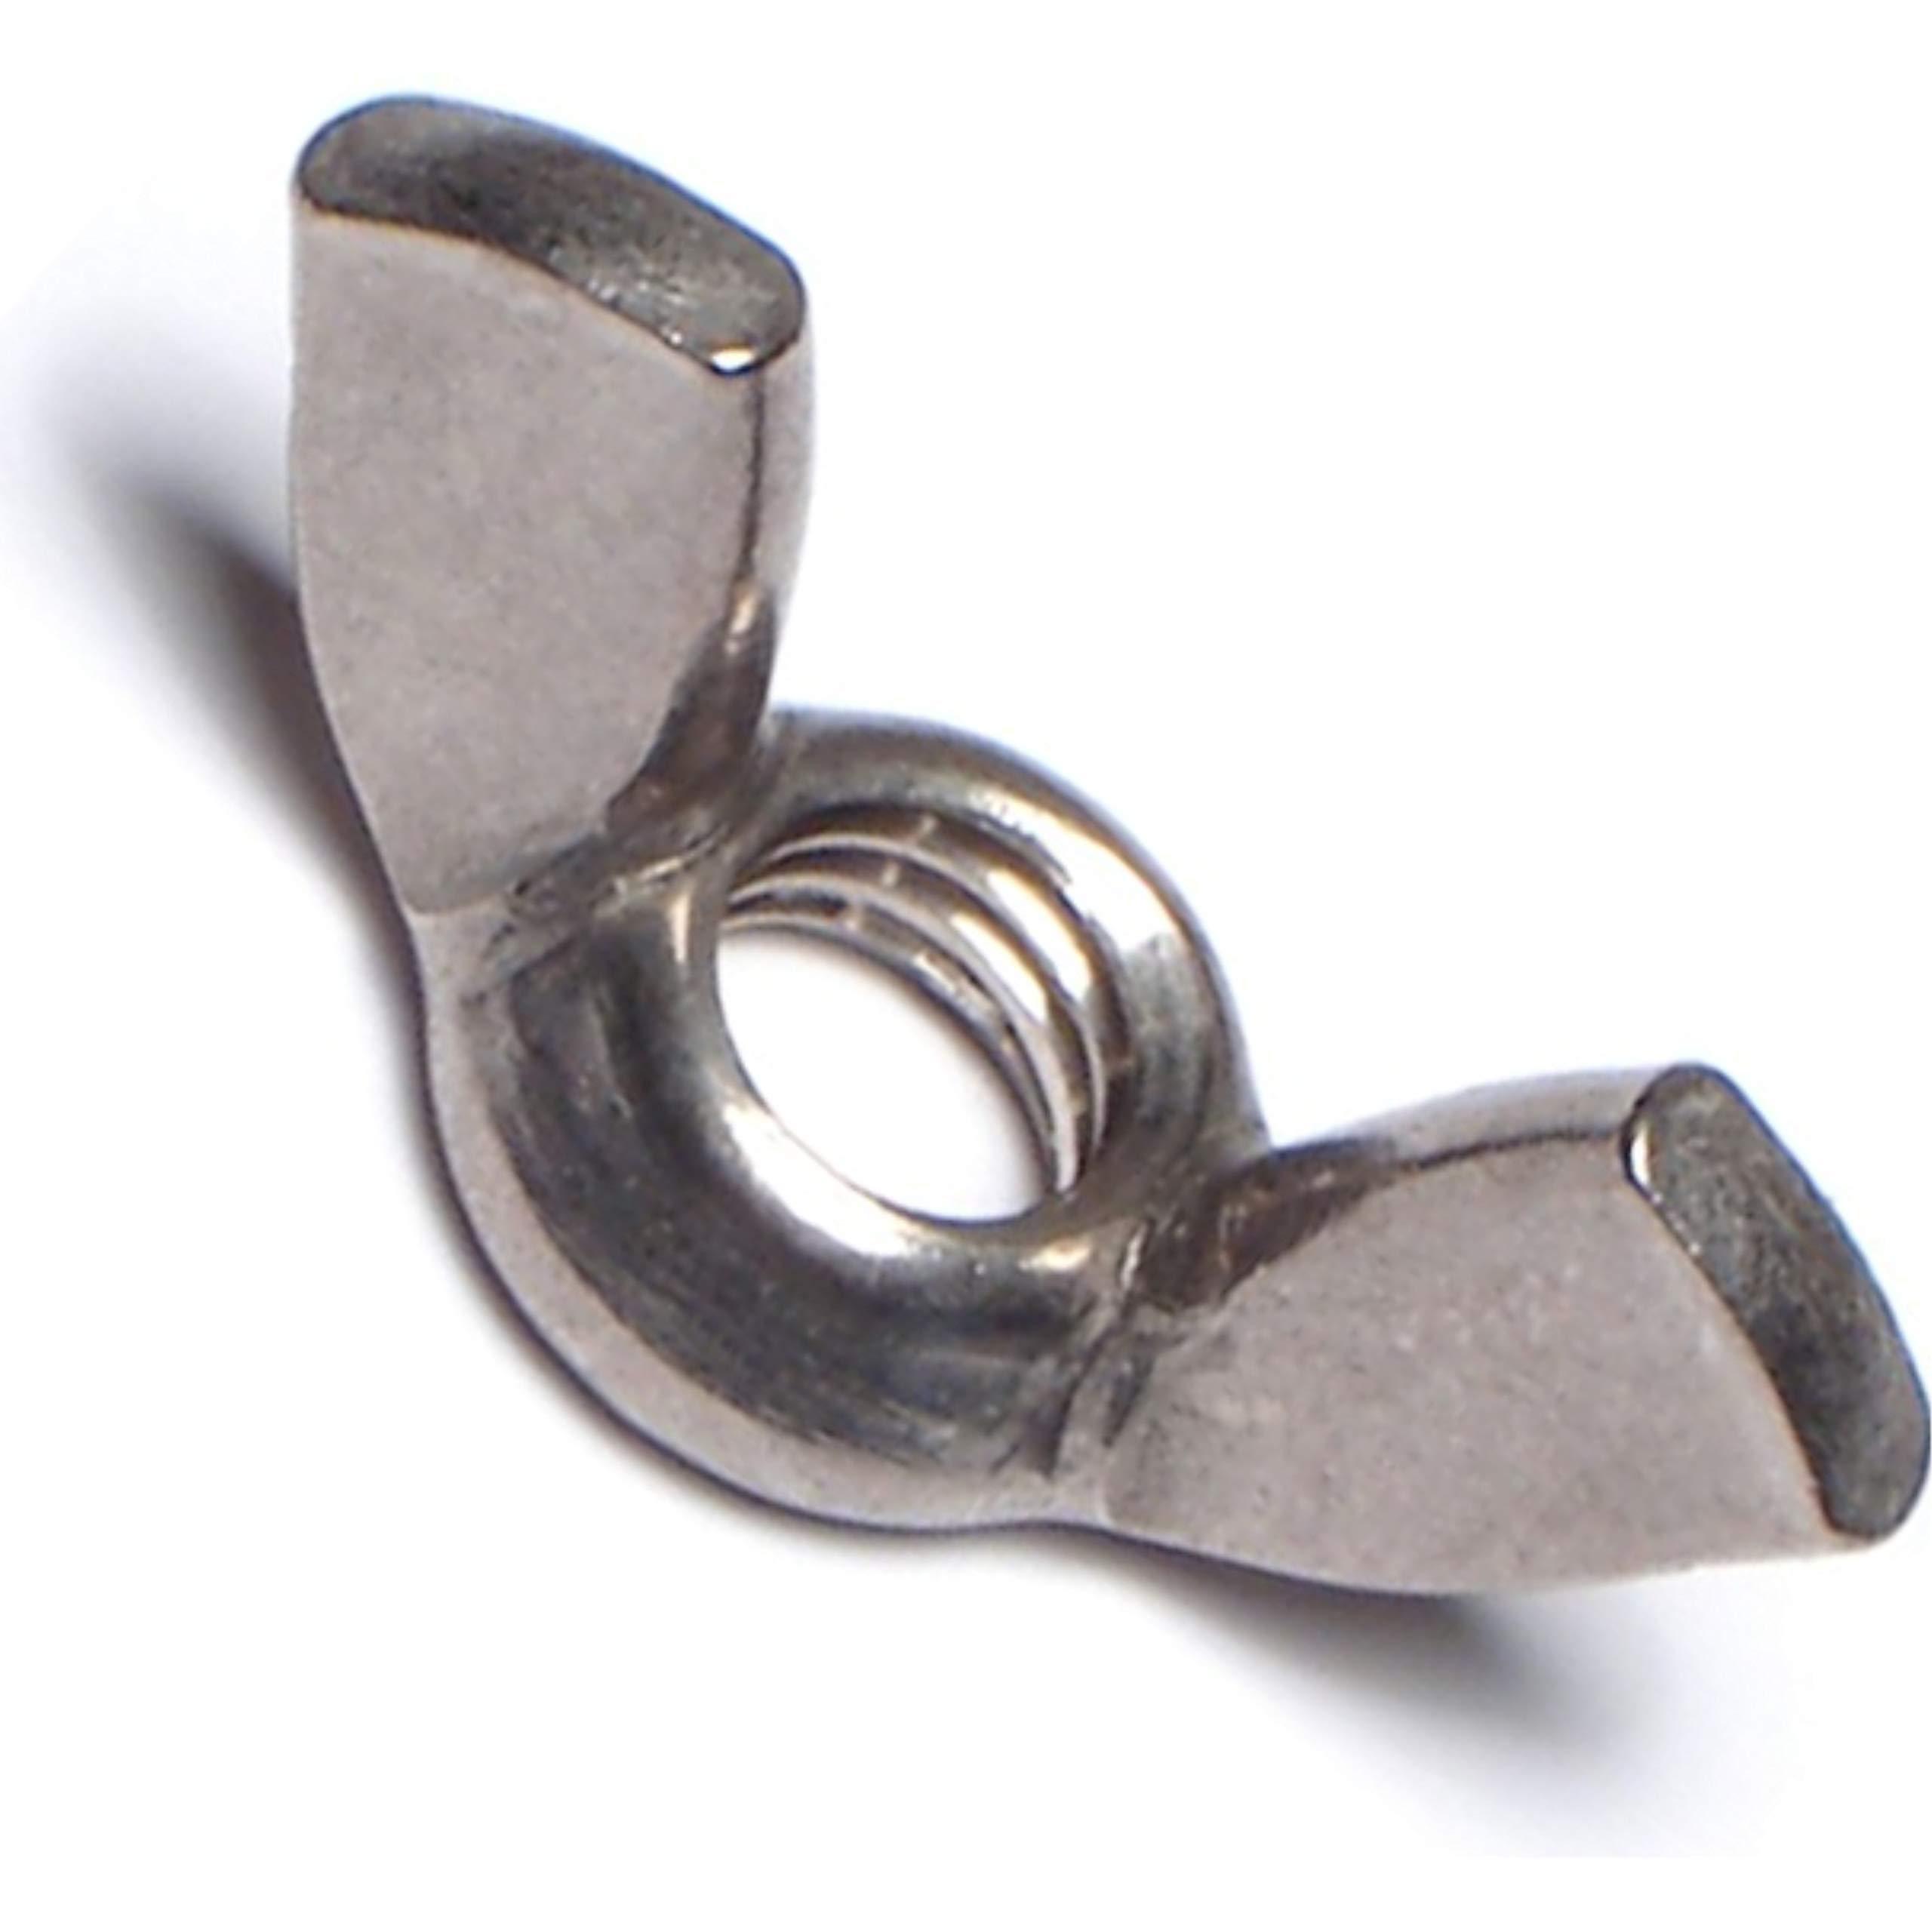 hard-to-find fastener 014973180522 wing nuts, 5/16-18, piece-6